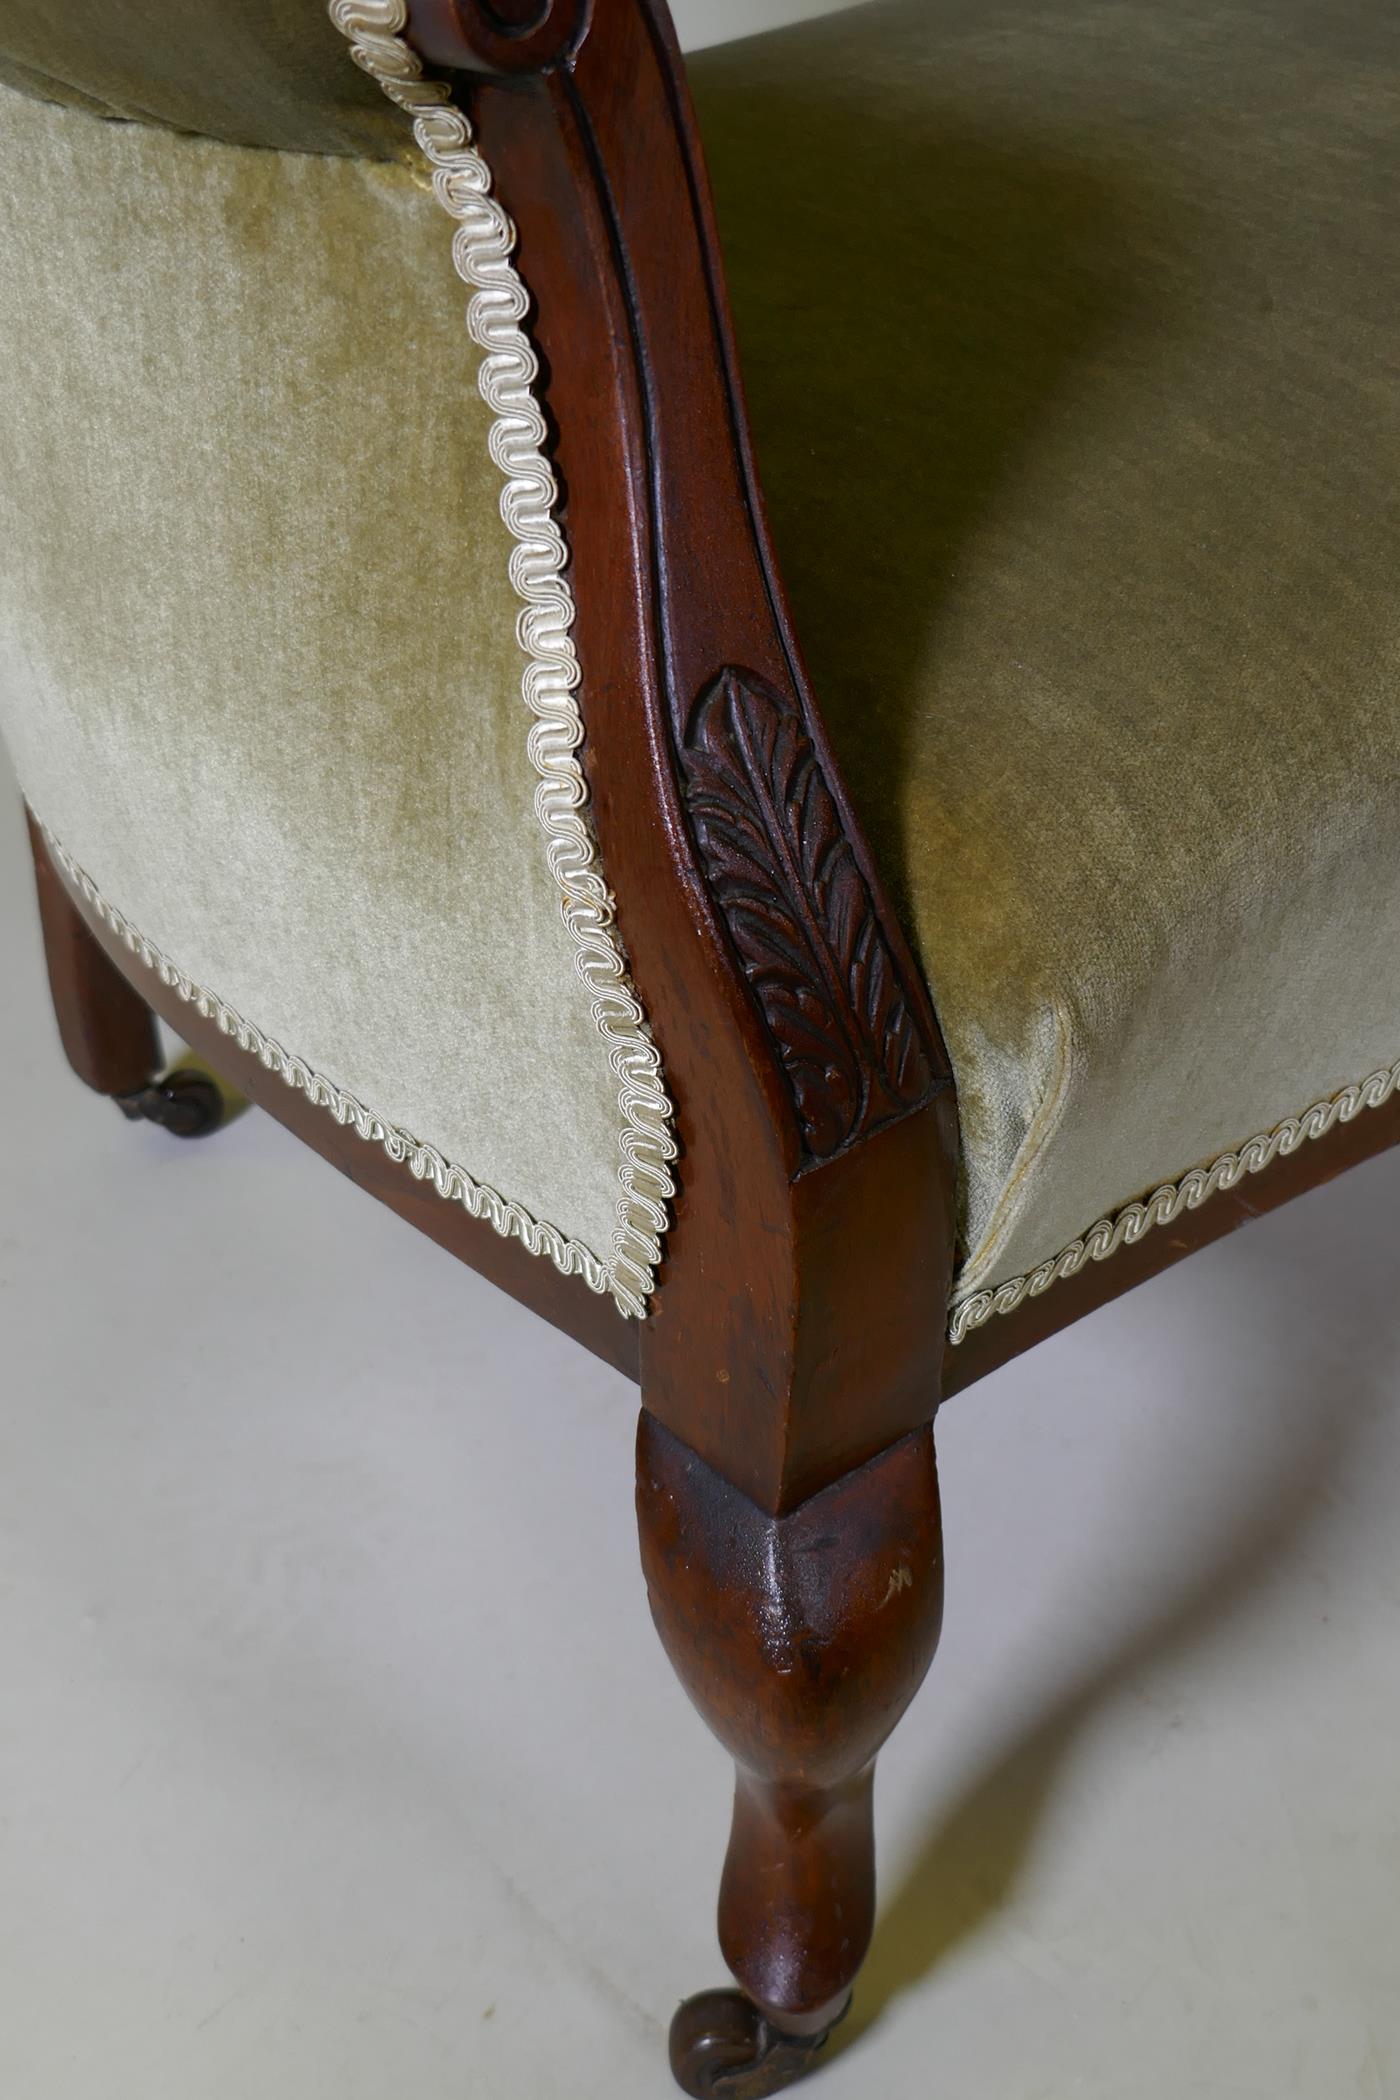 A C19th mahogany settee with carved and pierced detail and cabriole legs, possibly Berkey & Gay - Image 5 of 5